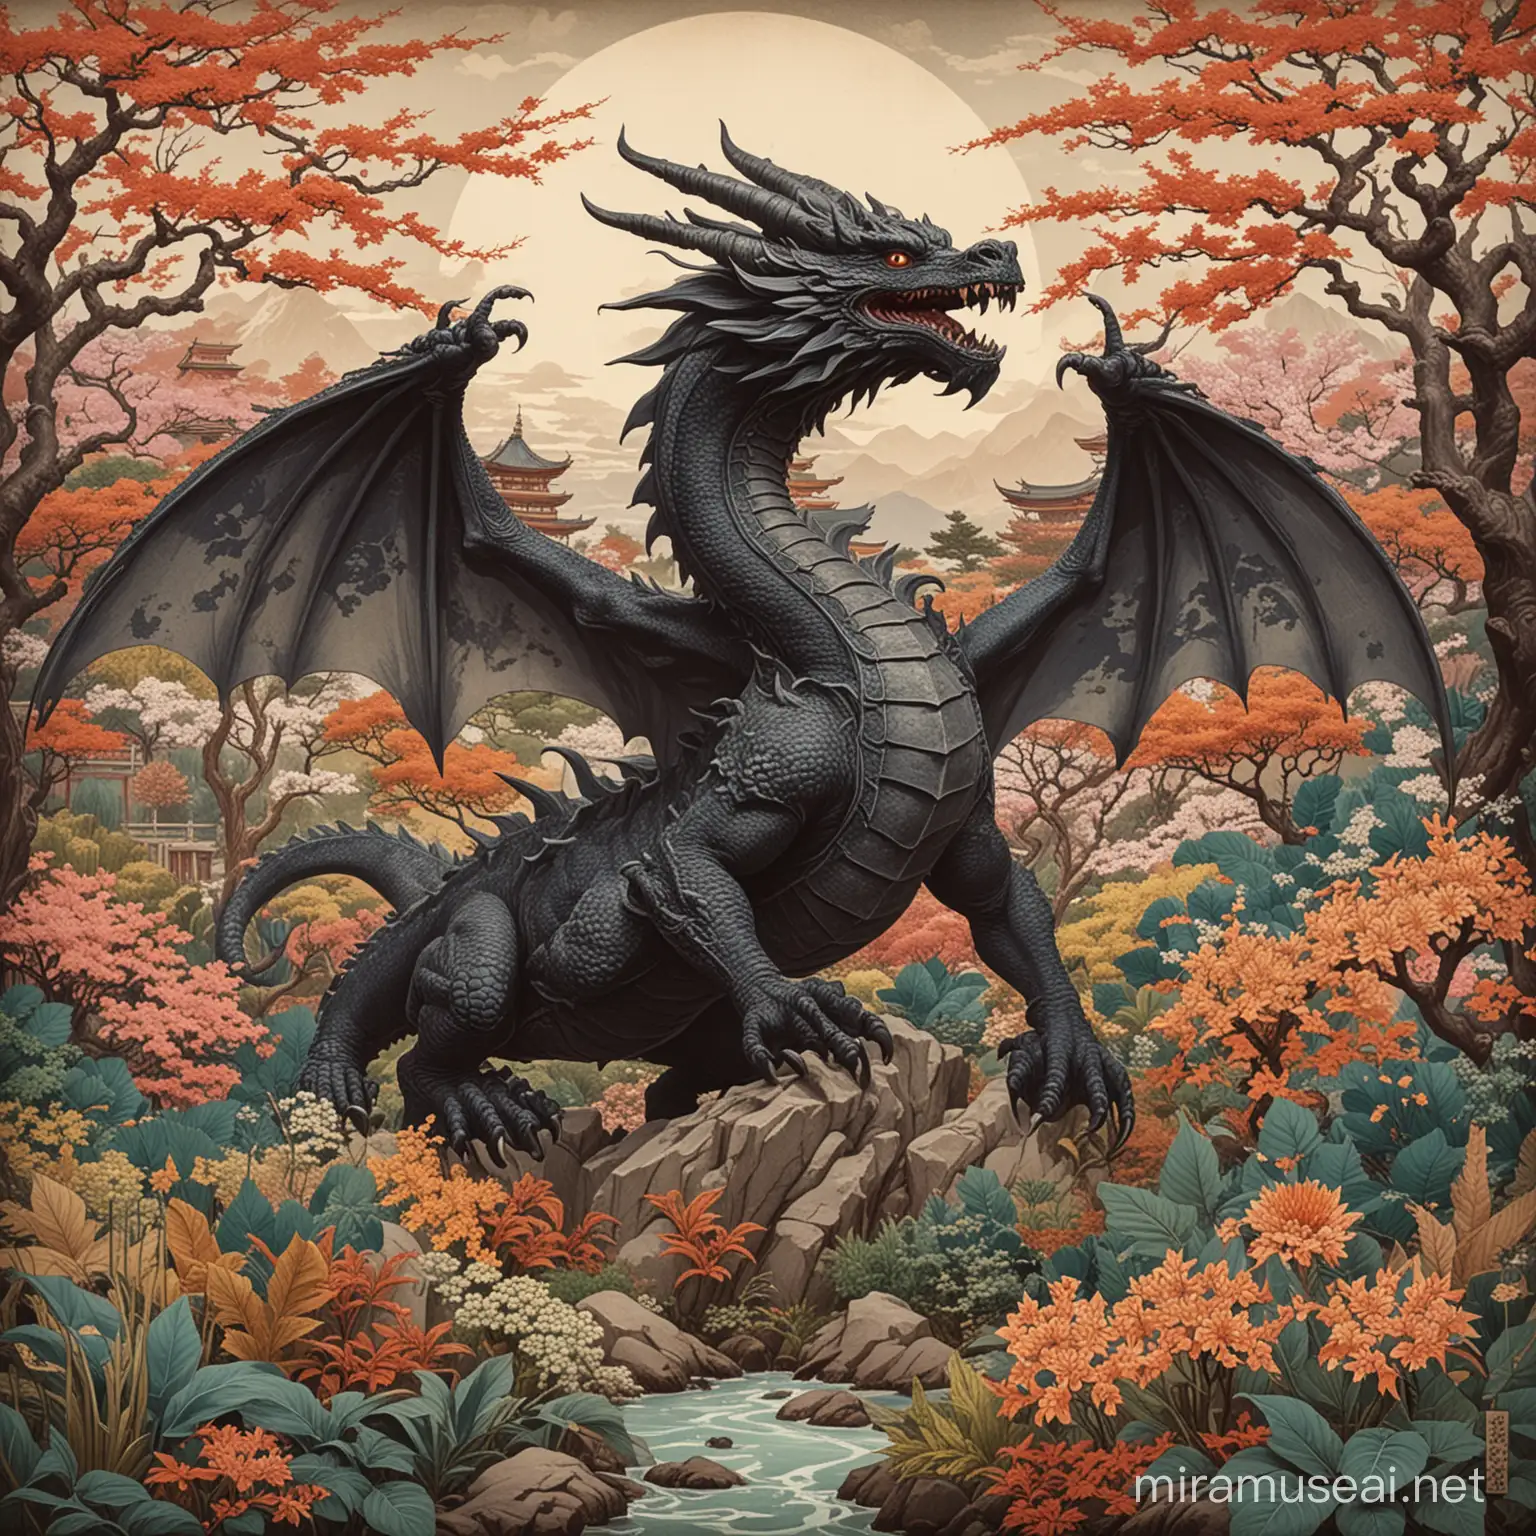 Camazotz DEADLY GOD OF BATS,The image is a statue of a dragon.ukiyo-e art,The image is a collage of a park featuring various elements such as plants, flowers, trees, and child art. It includes a mix of text, painting, drawing, and illustration.